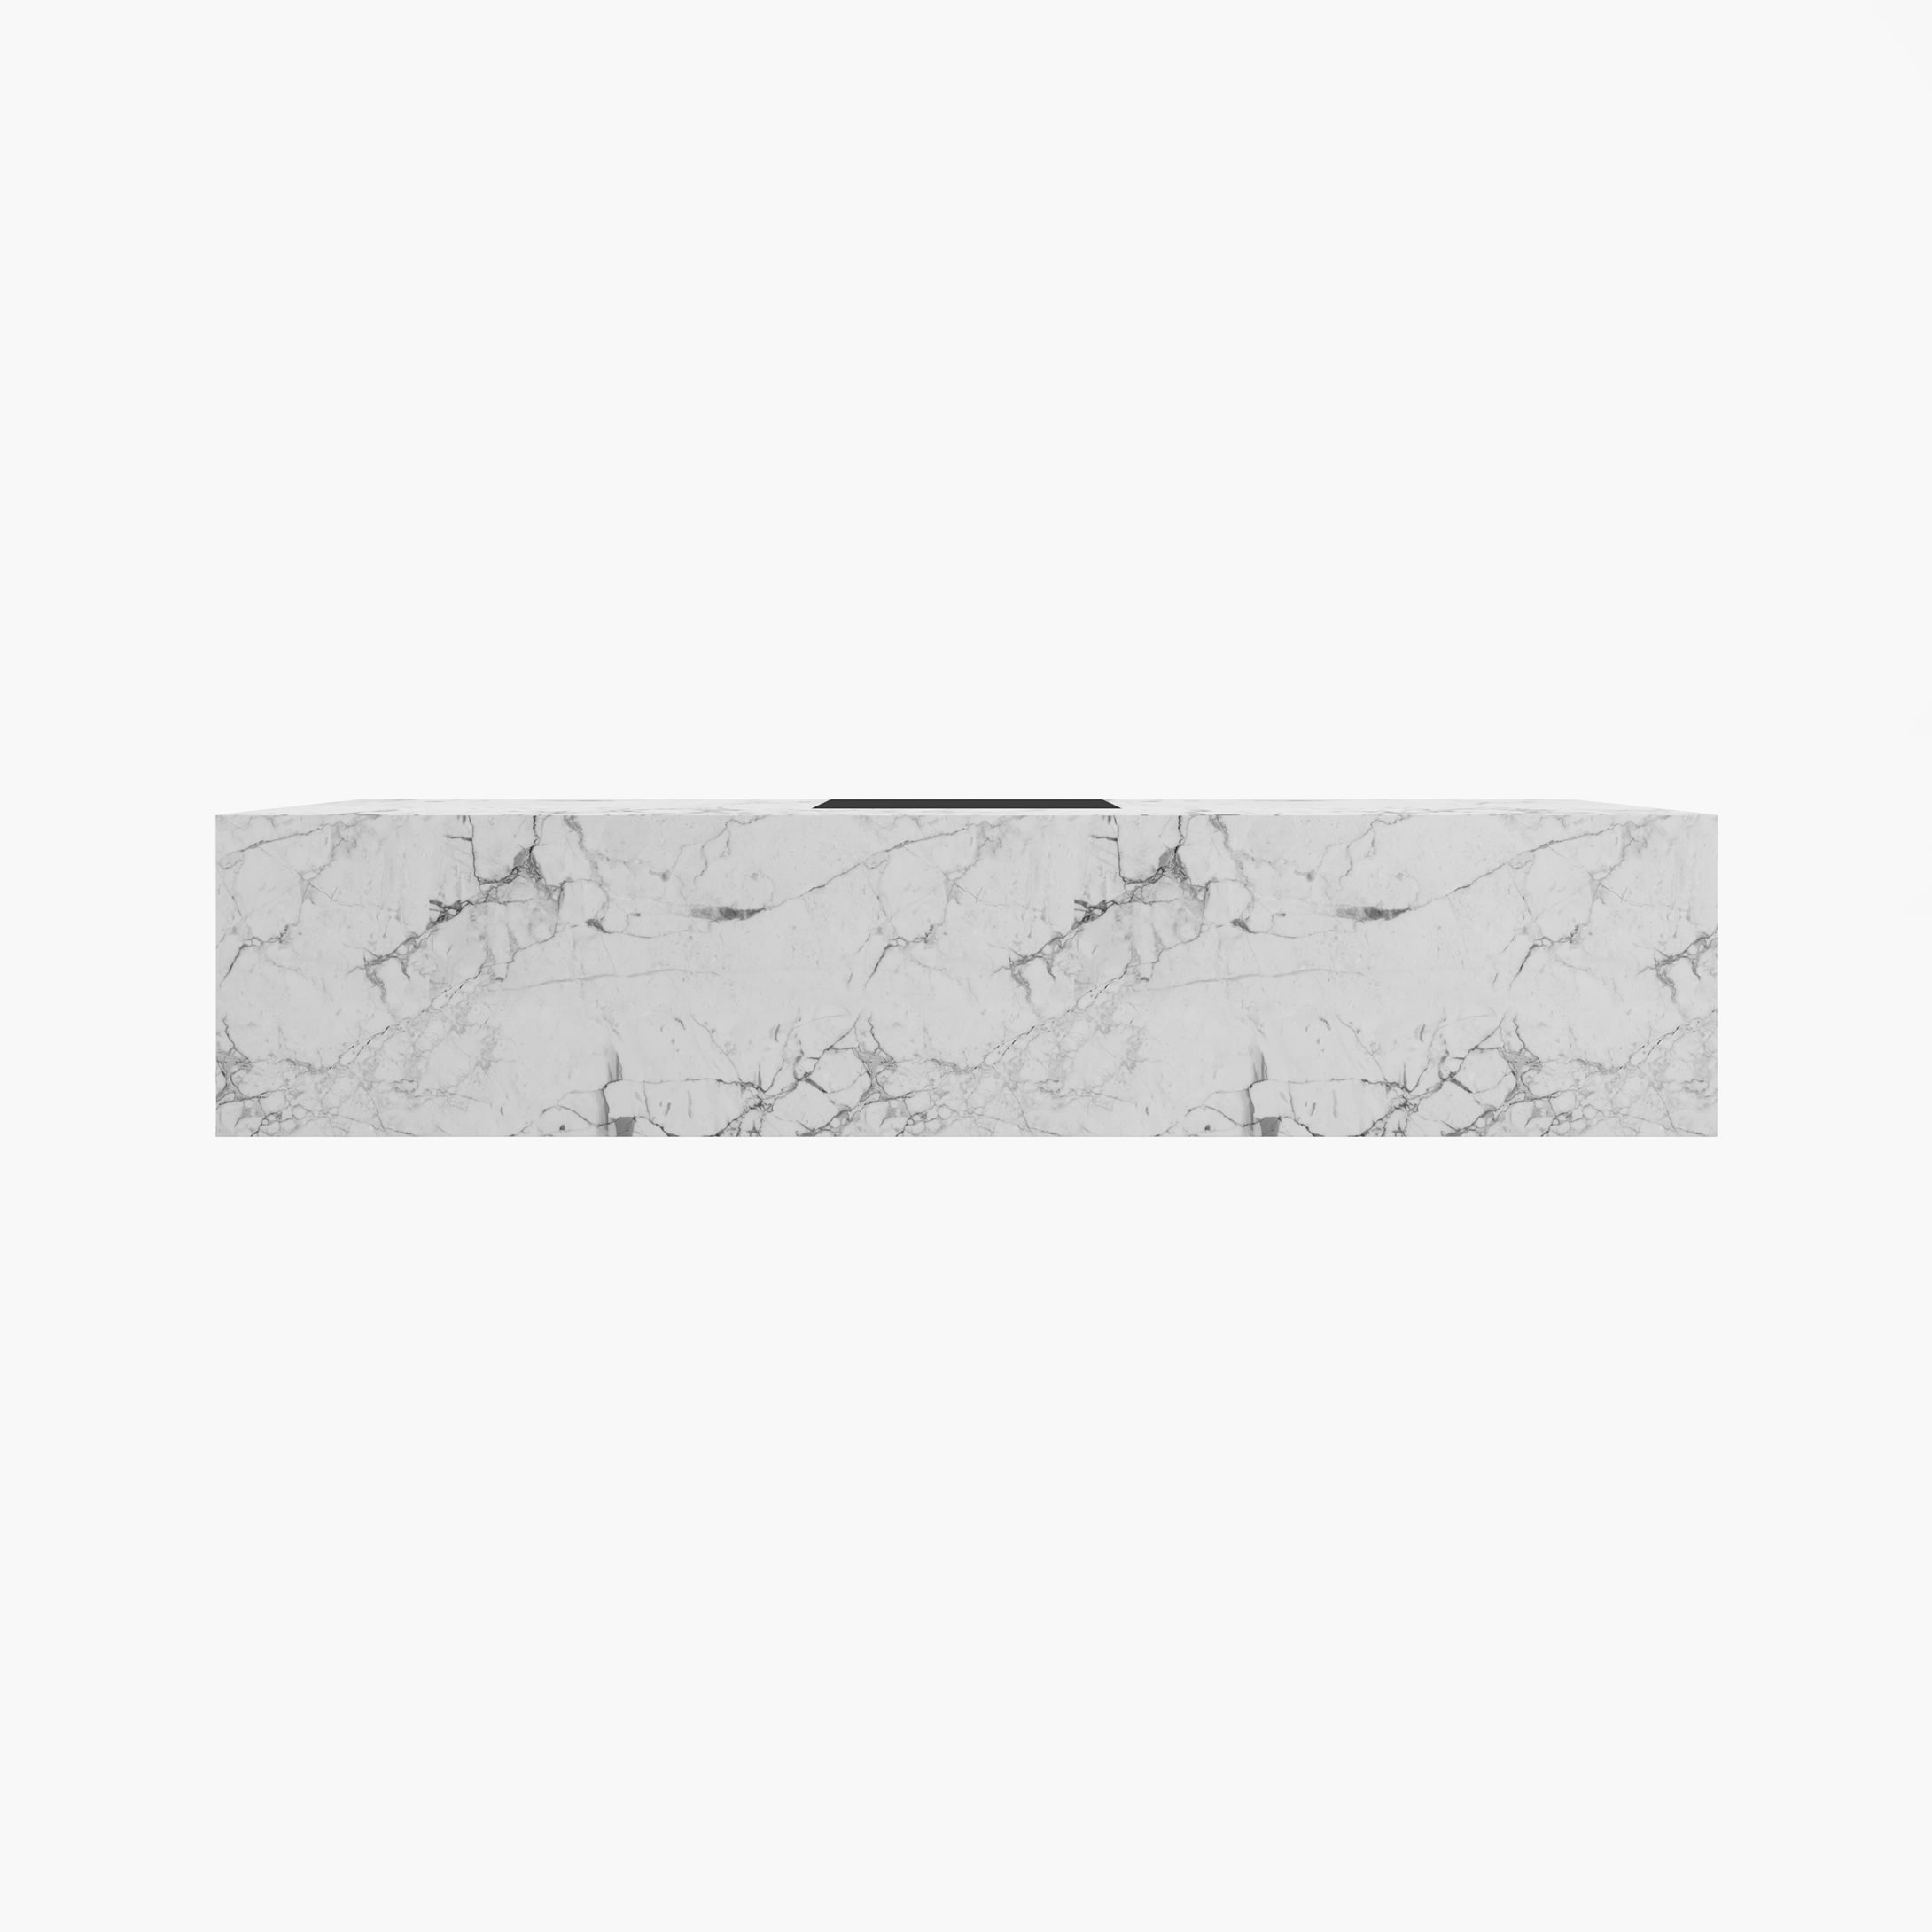 Desk large with extensible writing pad White Arabescato Marble timeless executive office art work Desks FS 417 FELIX SCHWAKE